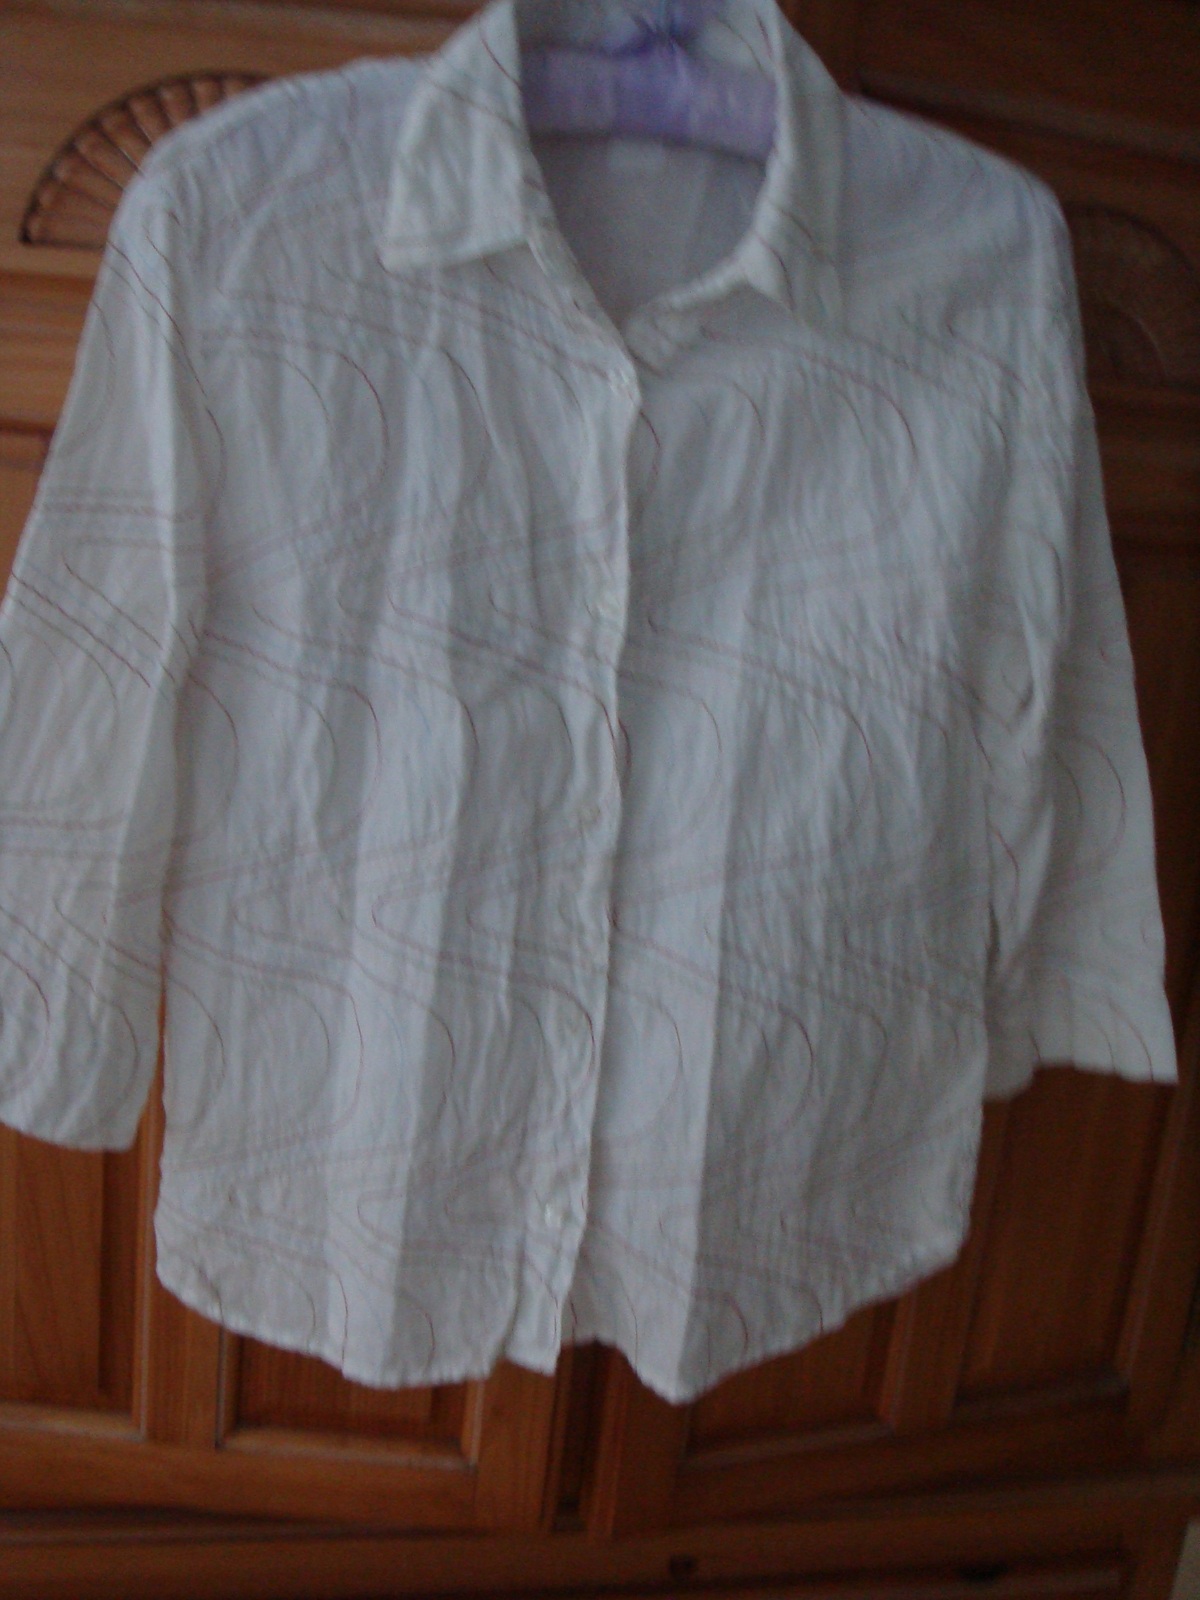 Primary image for Women's Print Blouse Size a Small by 120% Hno